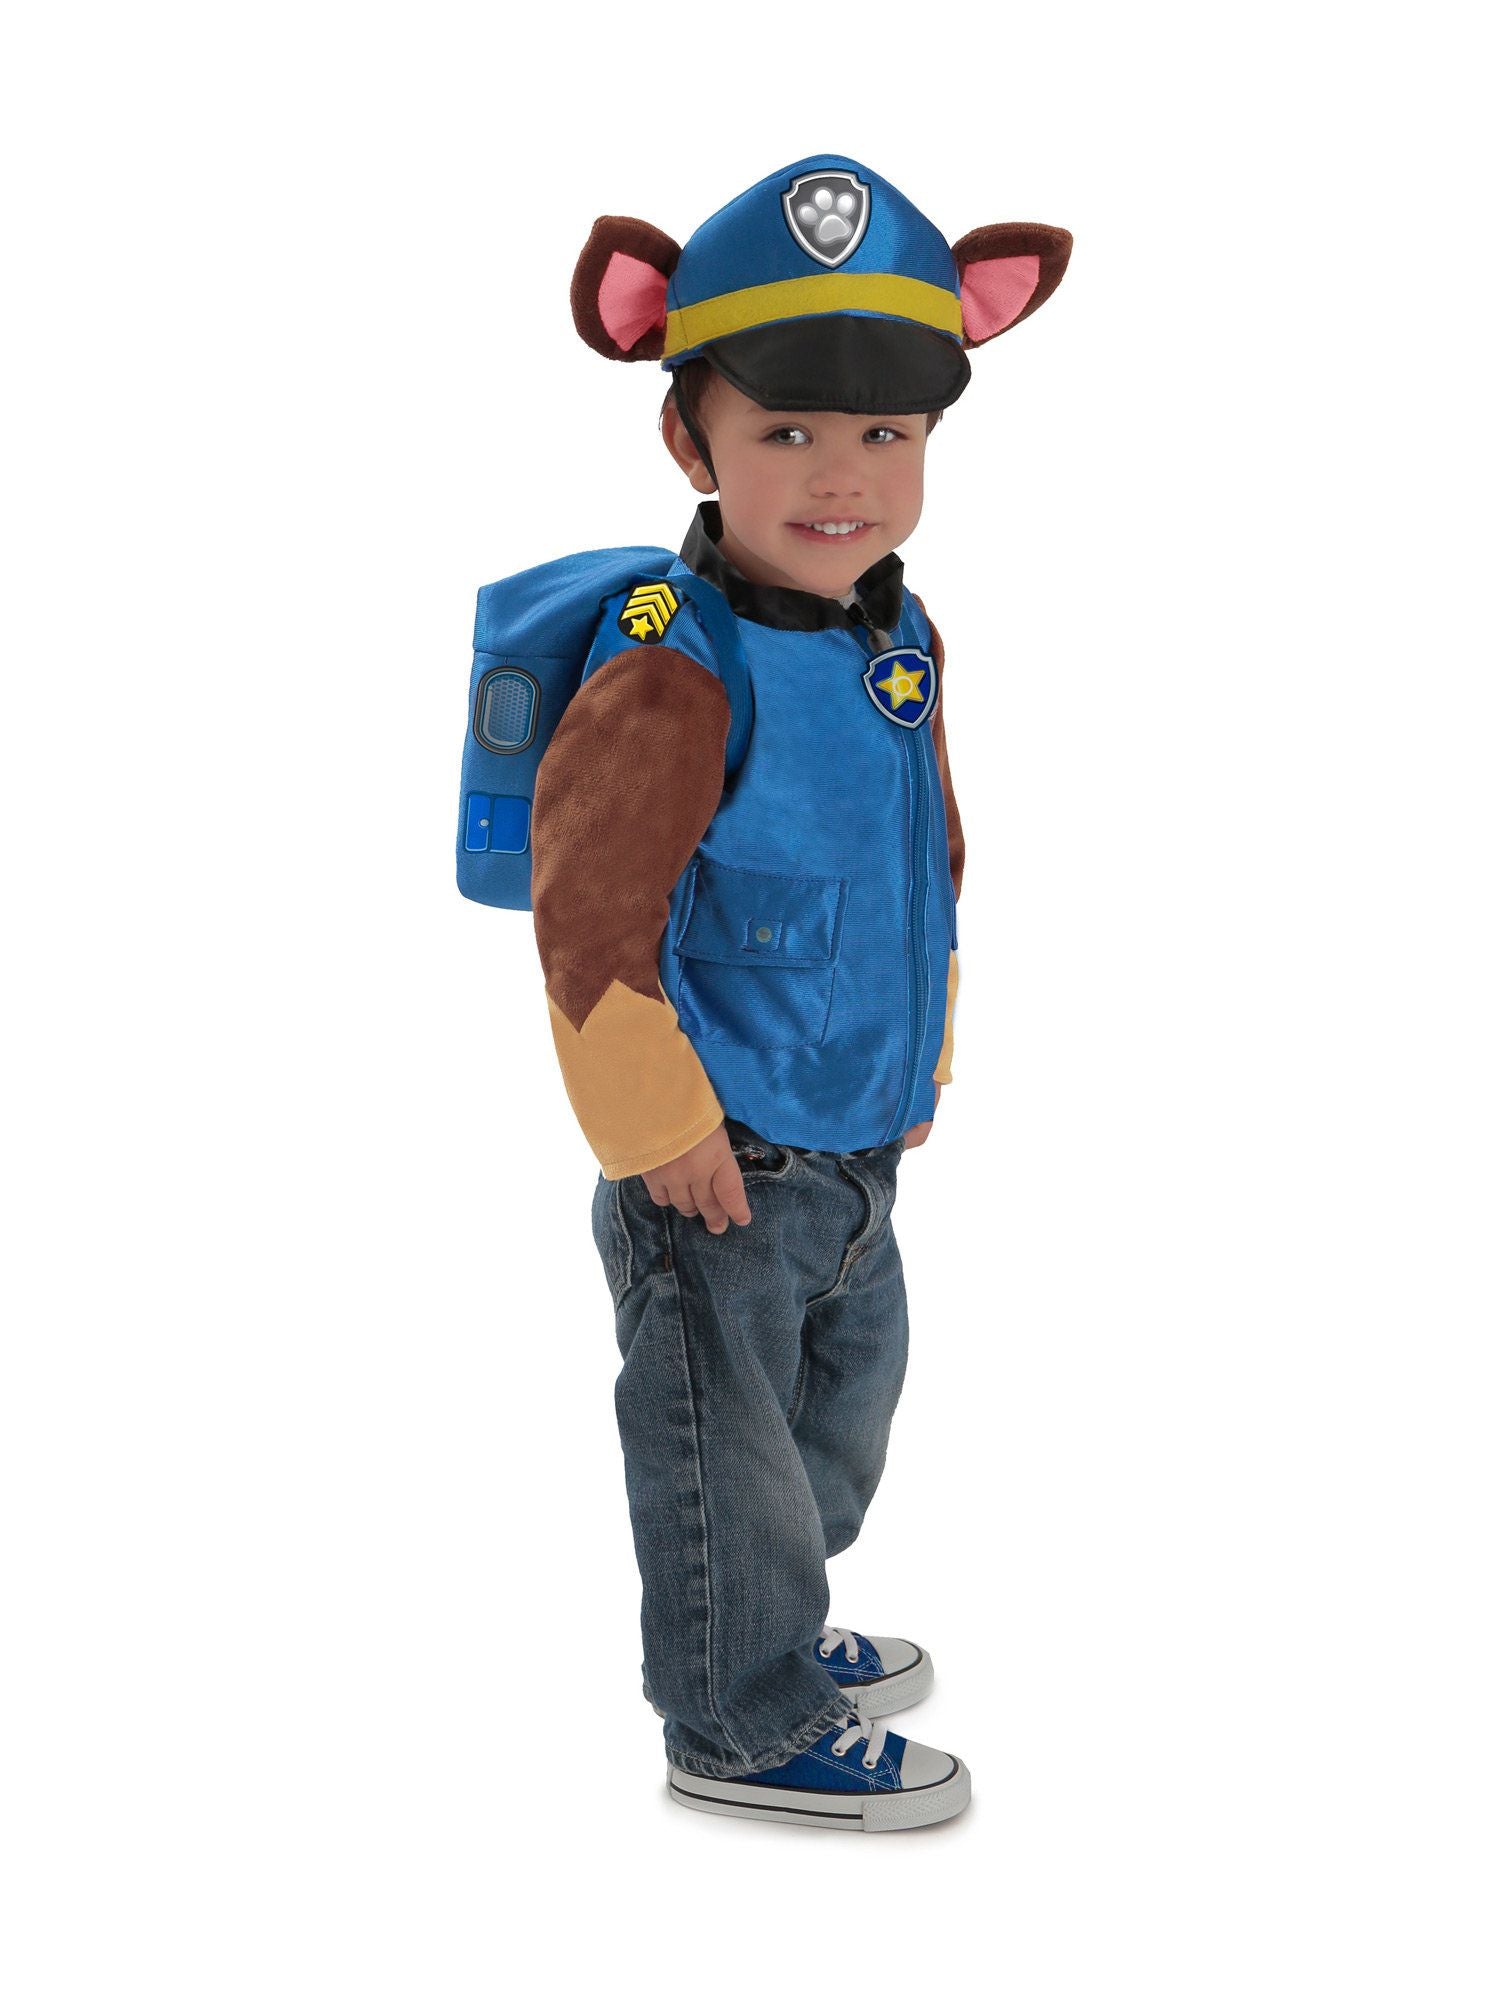 Paw Patrol Chase Jacket, Hat and Backpack for Toddlers - costumes.com